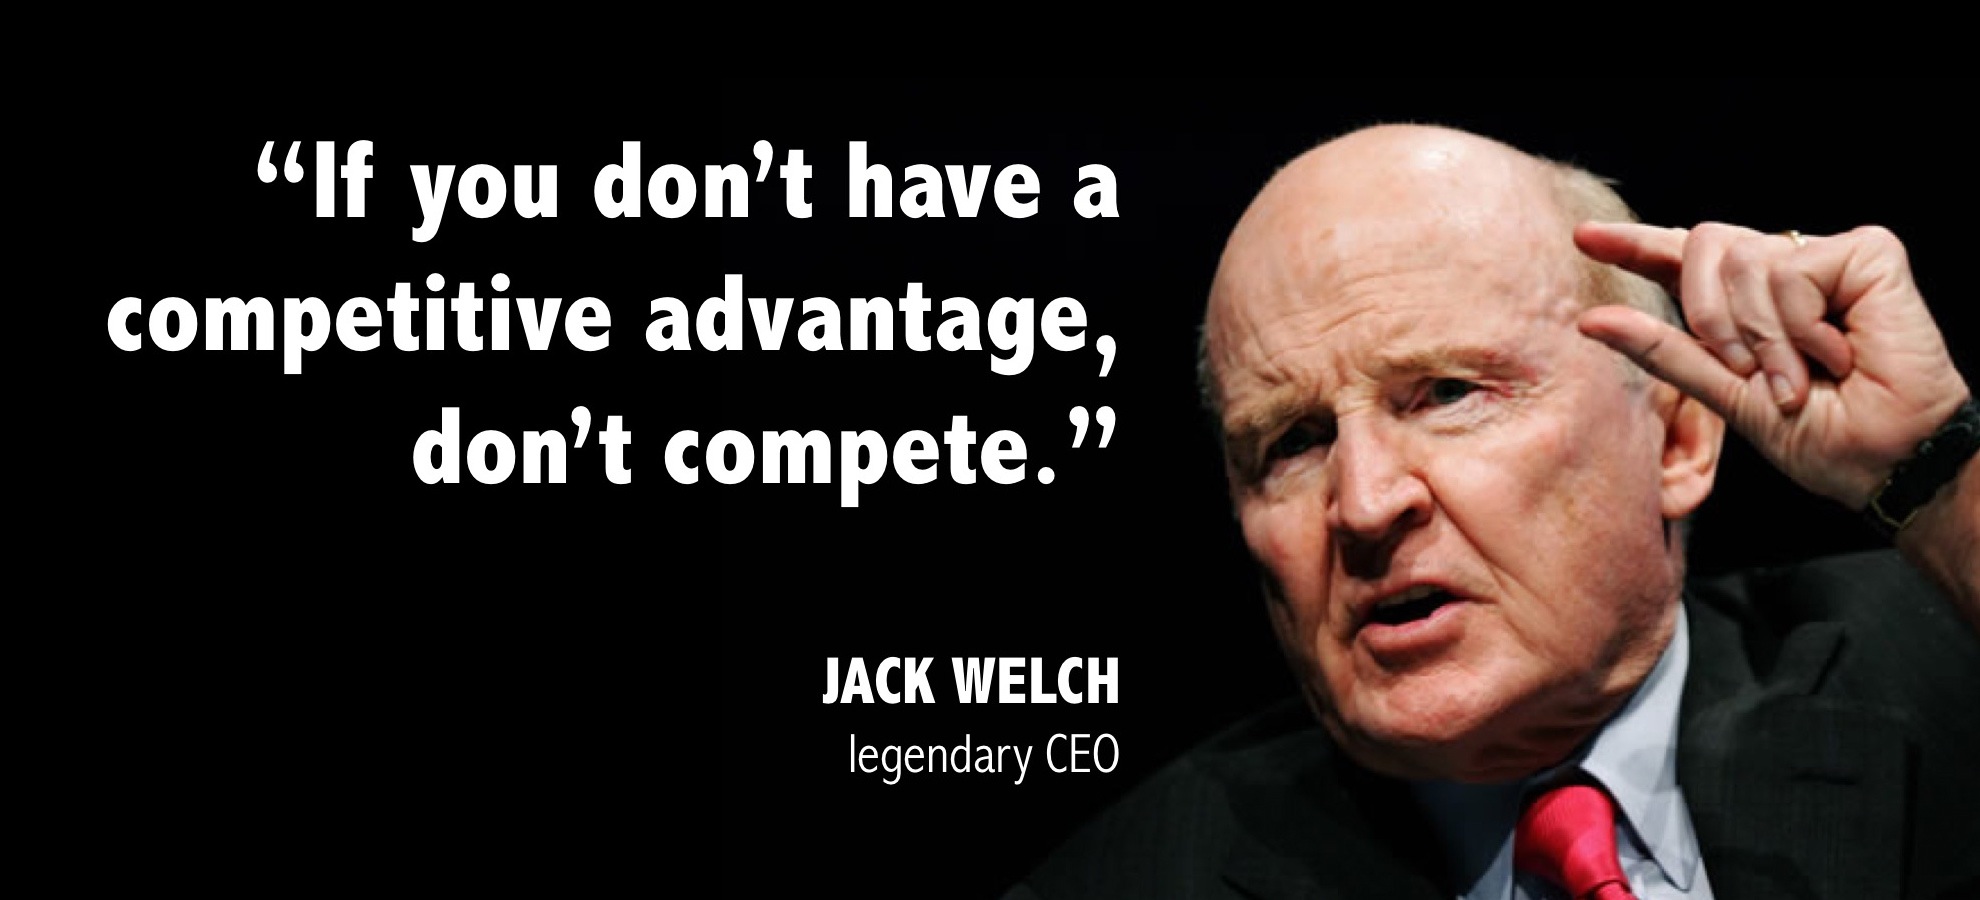 Jack Welch's quote #2